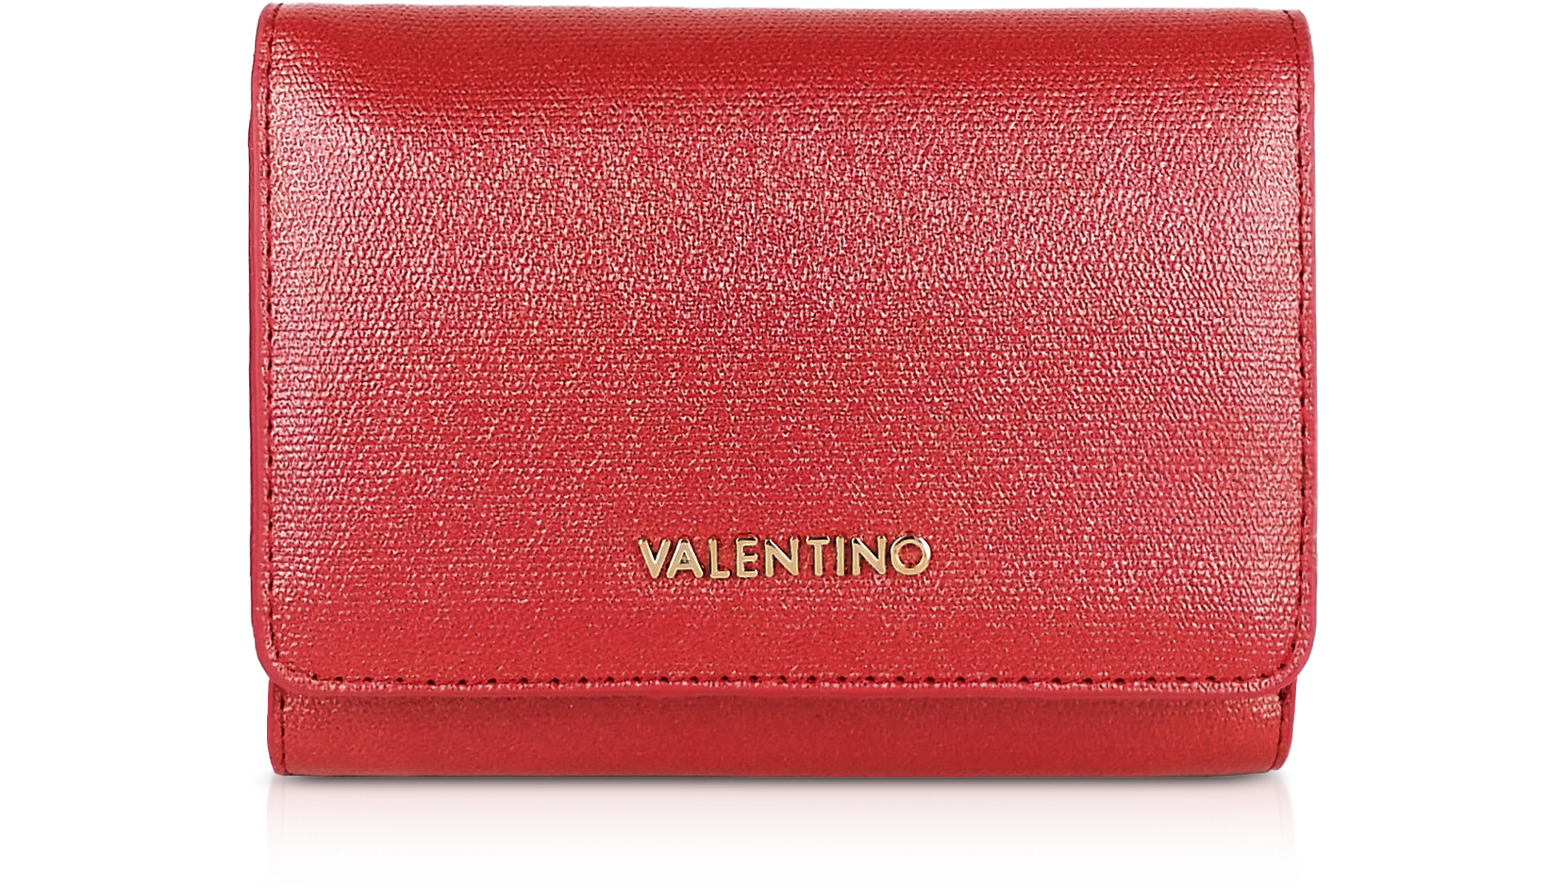 Valentino by Mario Valentino Red Marilyn Metallic Eco Leather Small Flap at FORZIERI